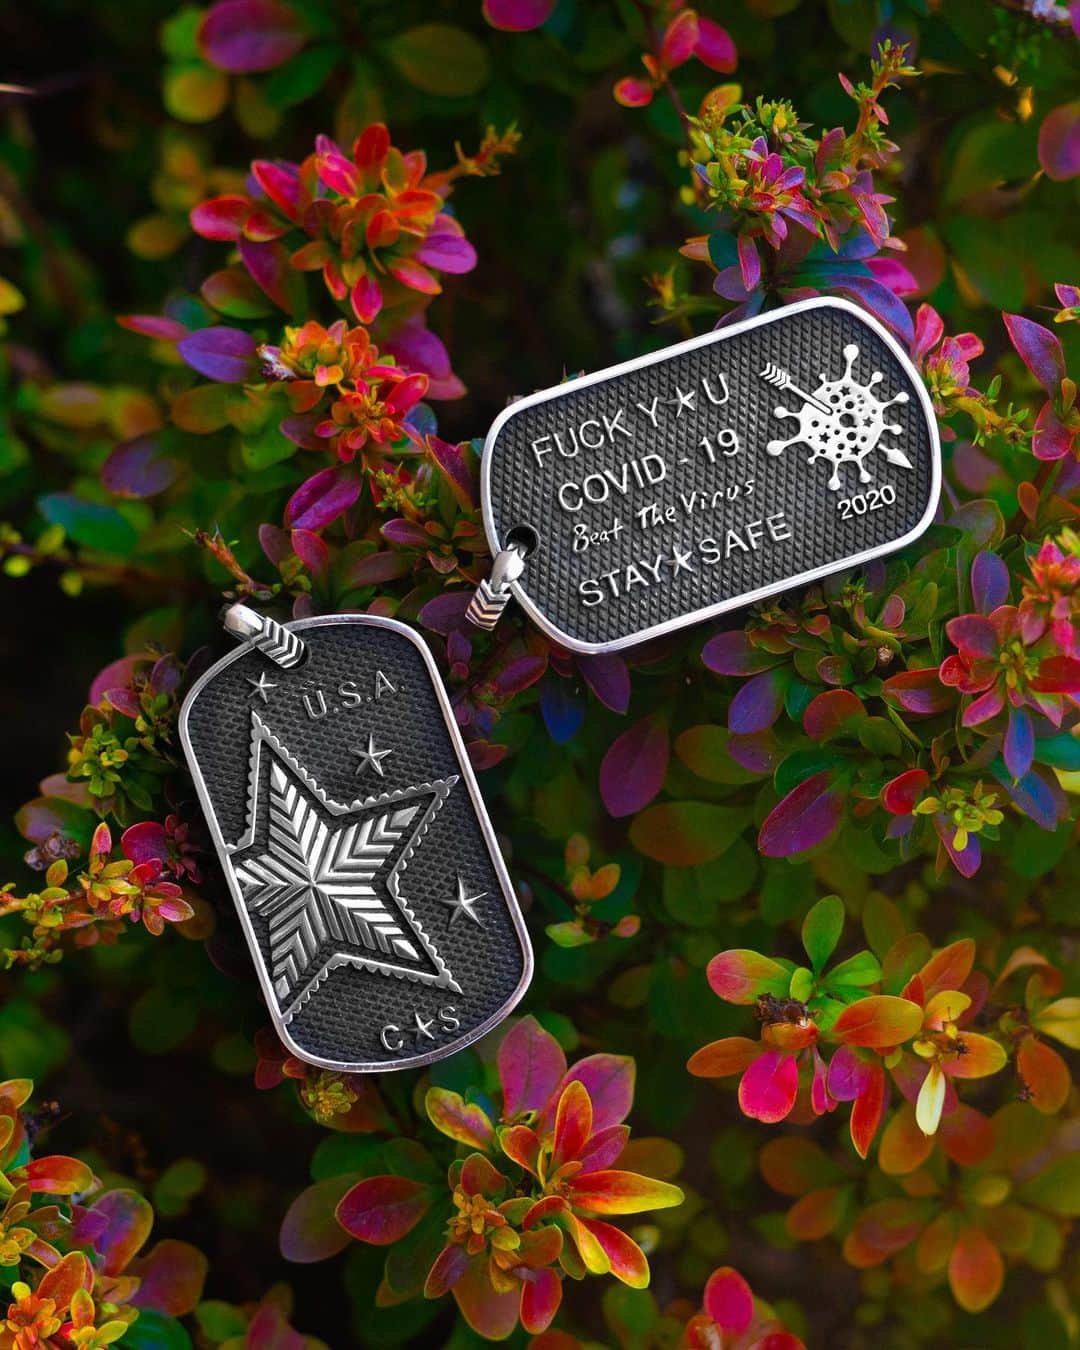 コディ サンダーソンのインスタグラム：「🏆【Dog Tag - C★S★ Beat The Virus】 These exquisite creation is dedicated to all the people of the world who have continued to have faith, trust and perseverance that we will all get through this pandemic together much better, bigger and stronger than we once were.   2020 has been a year full of hardships and challenges.  We must face these challenges together to defeat this disease, continue the war and stop the suffering of so many people and at the same time, to pay our highest respect to all the rescue teams all over the world!  As a big thank you to all the medical workers from doctors to nurses to first responders, we are donating a portion of the profits from the sale of these special limited edition pieces to various global medical organizations to help continue the fight against COVID-19!!!  Please help us do our part!!!   #BeatTheVirus #Covid19  #CodySanderson   【 軍牌-C★S★擊敗病毒】  這些精湛的創作致力奉獻給世界上所有繼續擁有信念，信任和毅力的人們，我們將比以往任何時候都更好，更大，更強大地共同度過這場大流行。   2020年是充滿艱辛和挑戰的一年。  我們必須共同面對這些挑戰，以戰勝這種疾病，繼續戰爭並停止許多人的痛苦，同時，我們要對世界各地的所有救援隊表示最高的敬意！   非常感謝所有從醫生到護士再到急救人員的醫務人員，我們將這些特殊限量版產品的銷售利潤中的一部分捐贈給了各個全球醫療組織，以幫助繼續對抗COVID-19！ !!  請幫助我們盡我們的一份力量！！！➕➕➕」